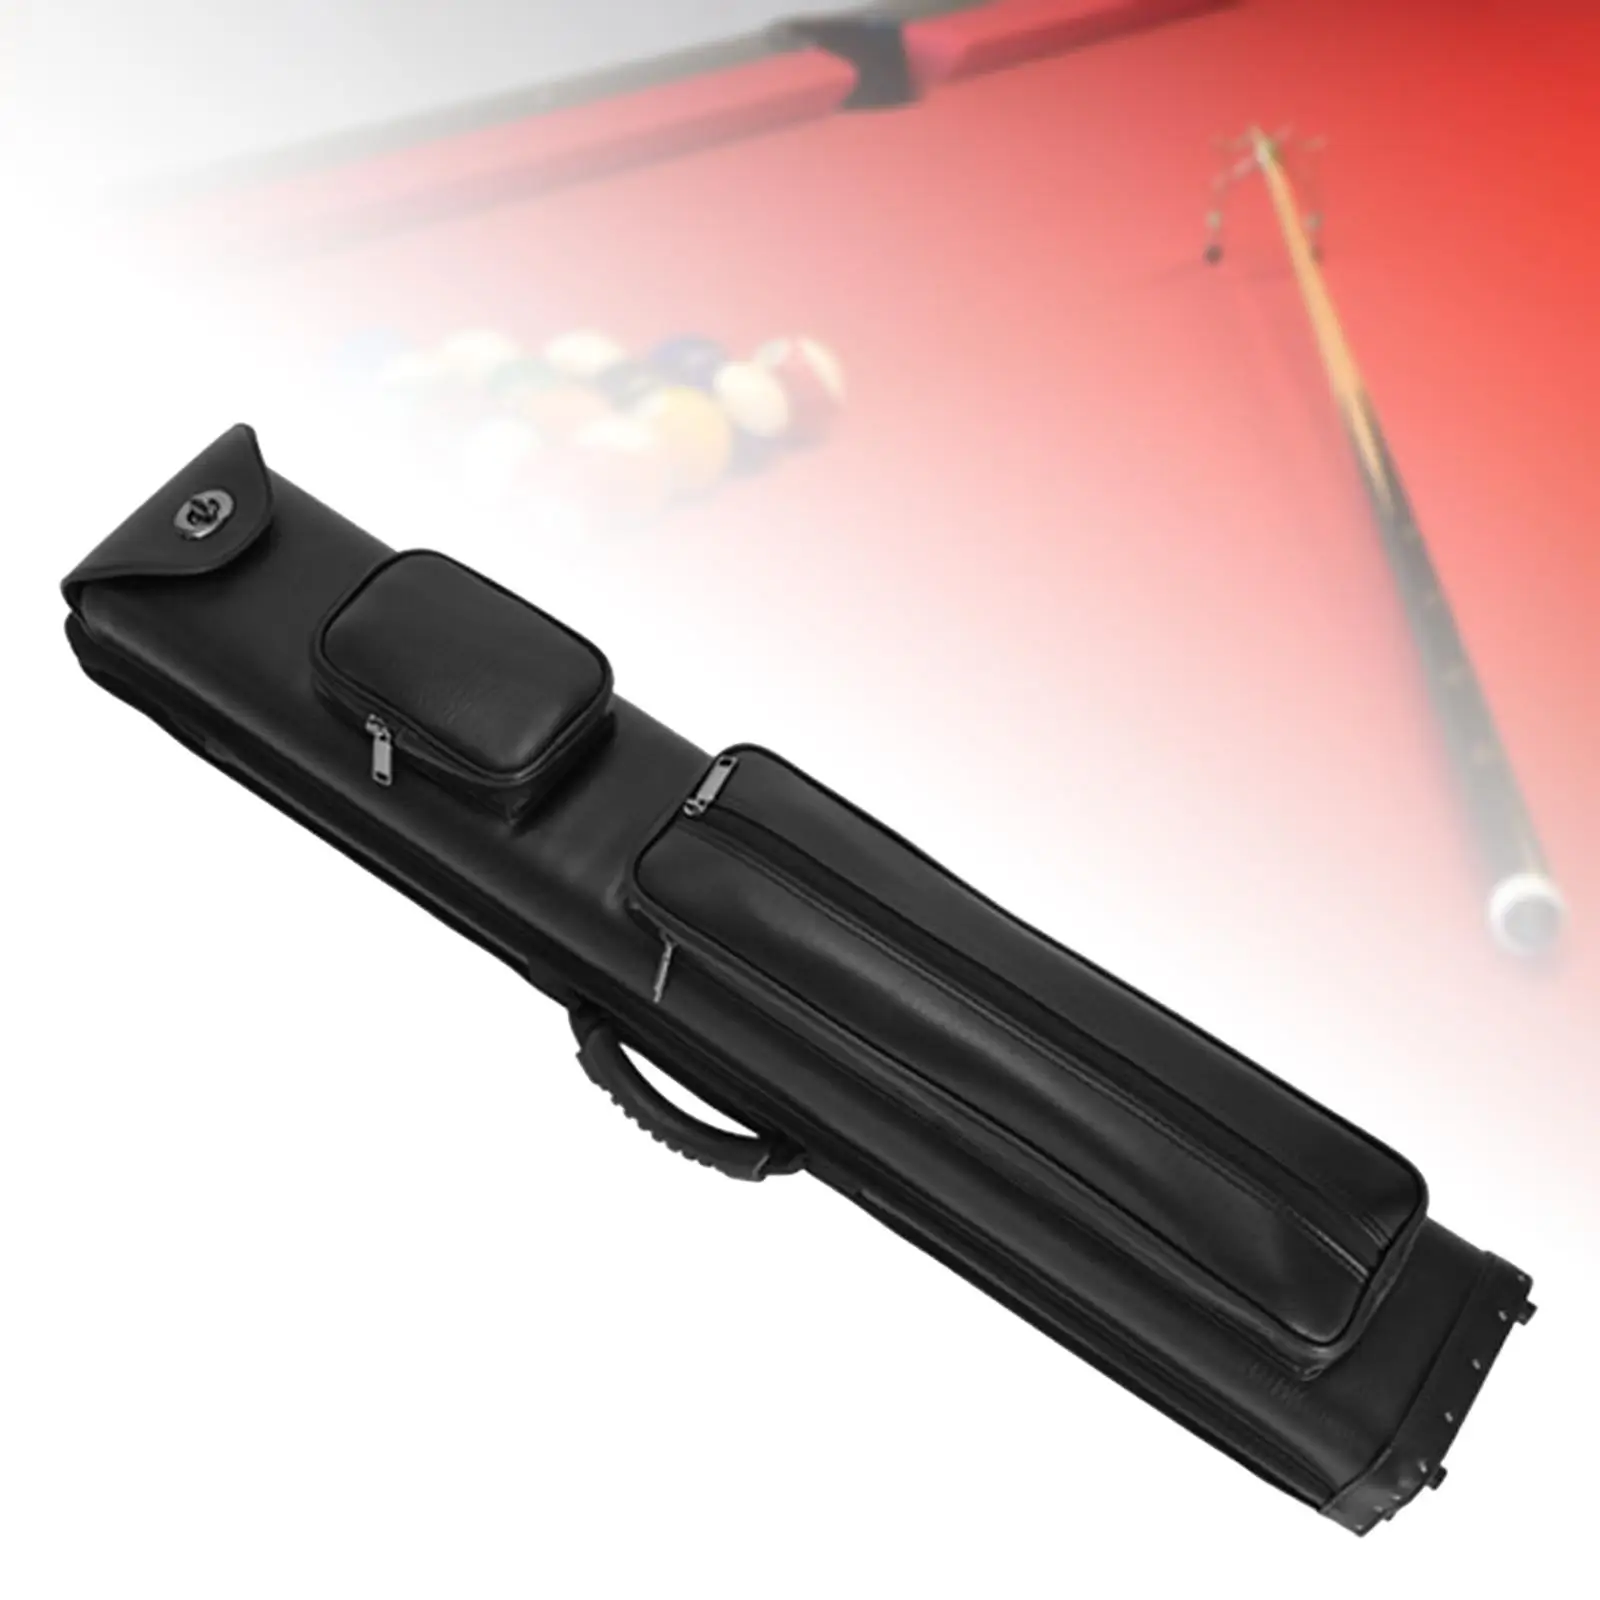 3B5S Pool Cue Case Bag Adjustable Shoulder Strap Portable 3 Butts 5 Shafts Pool Cue Protector Lightweight Billiard Accessory